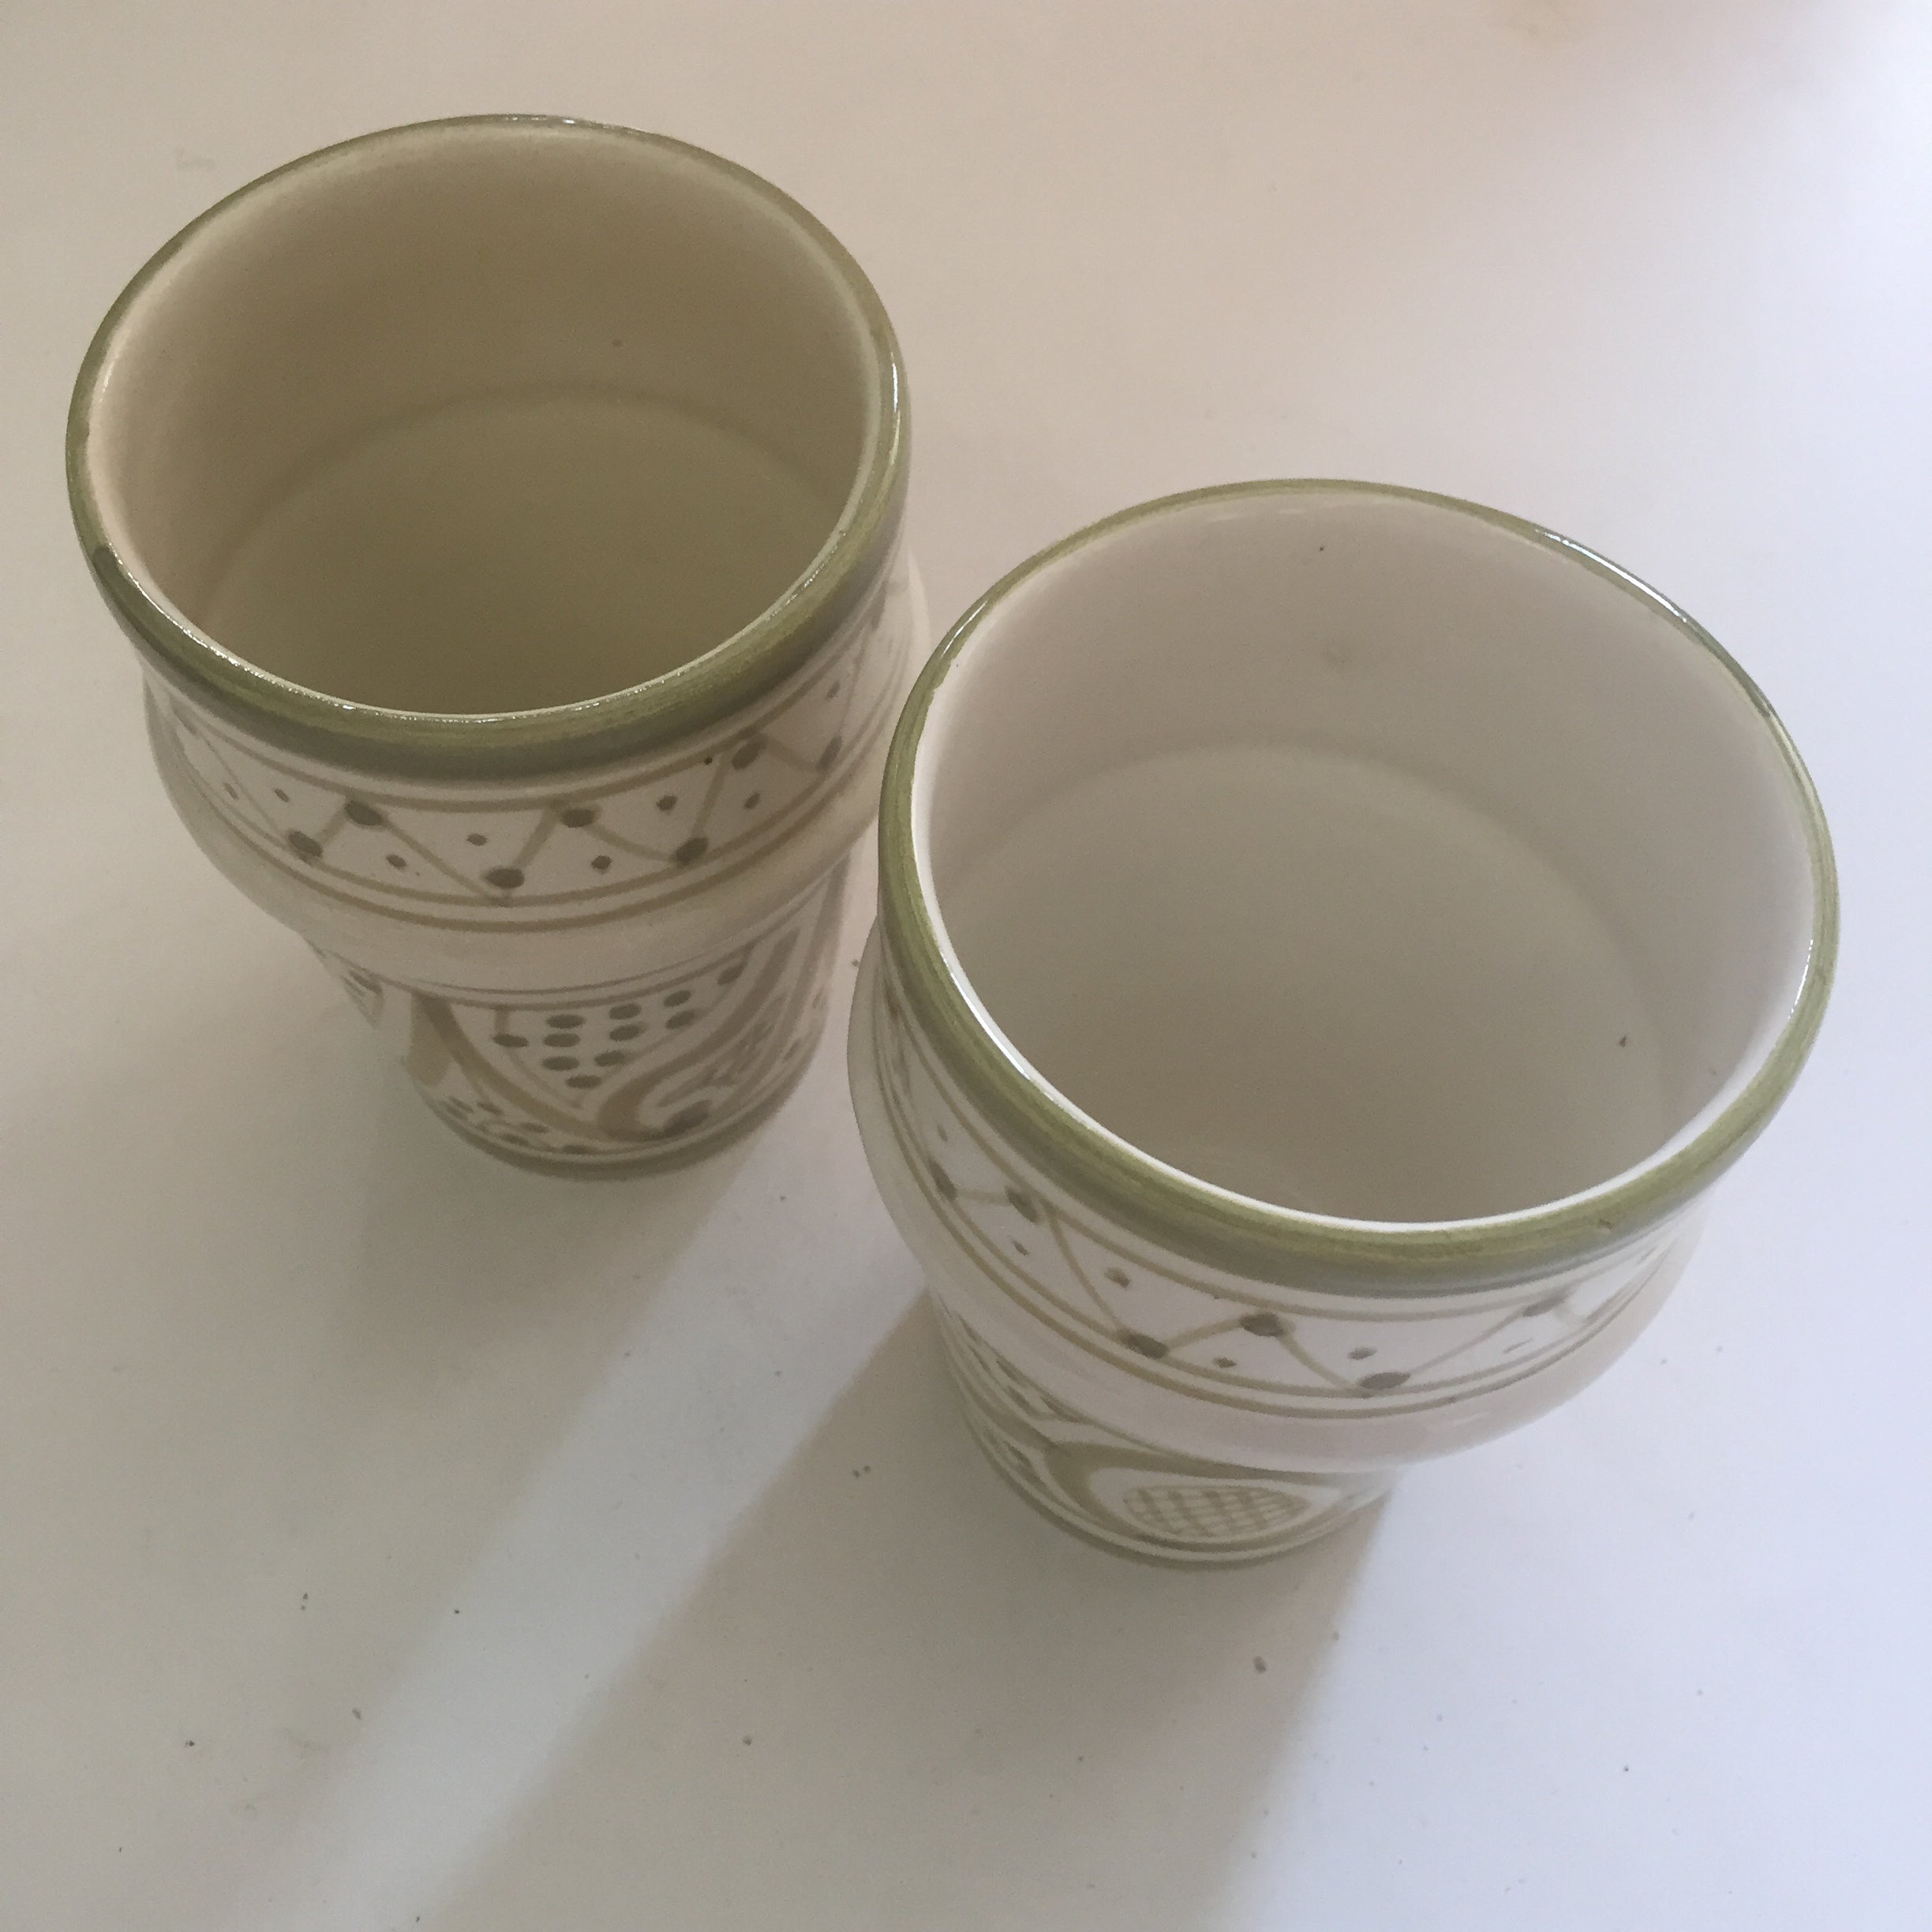 SAFI BELL & DEE cups set of 2 OLIVE